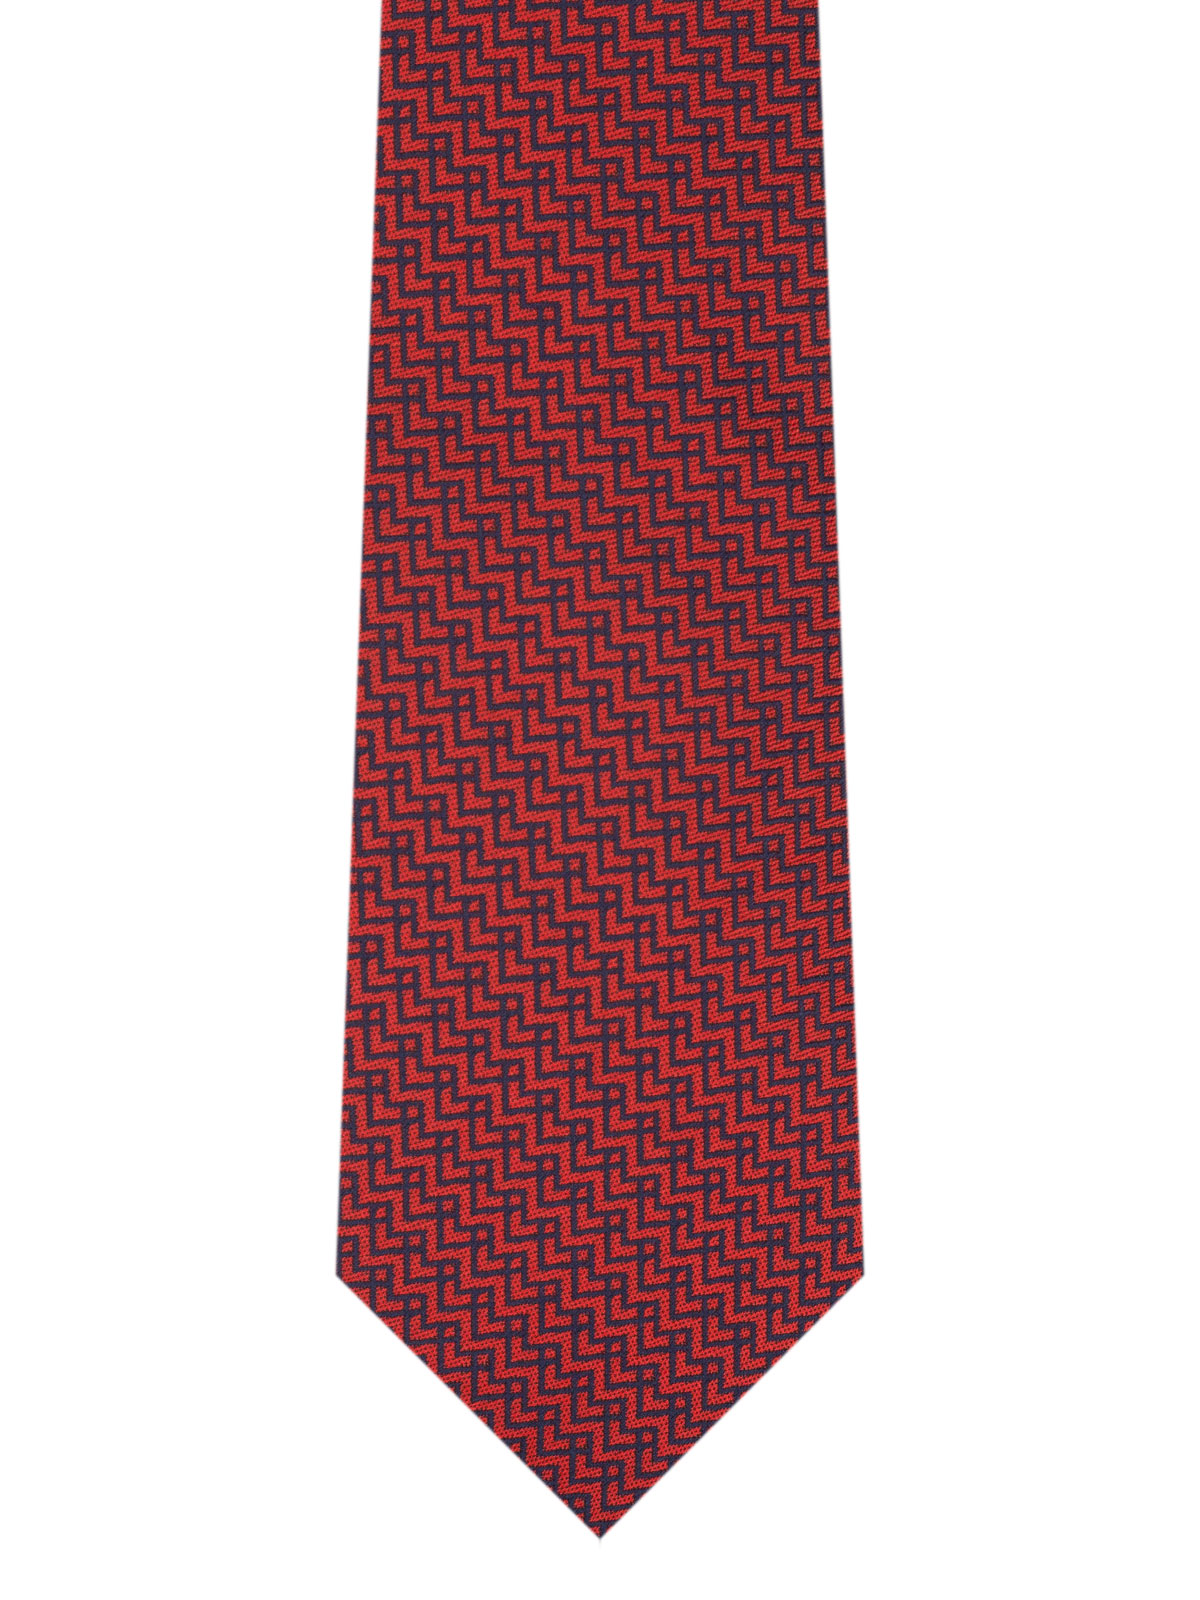 Red tie on blue zigzag lines - 10187 - € 14.06 img2